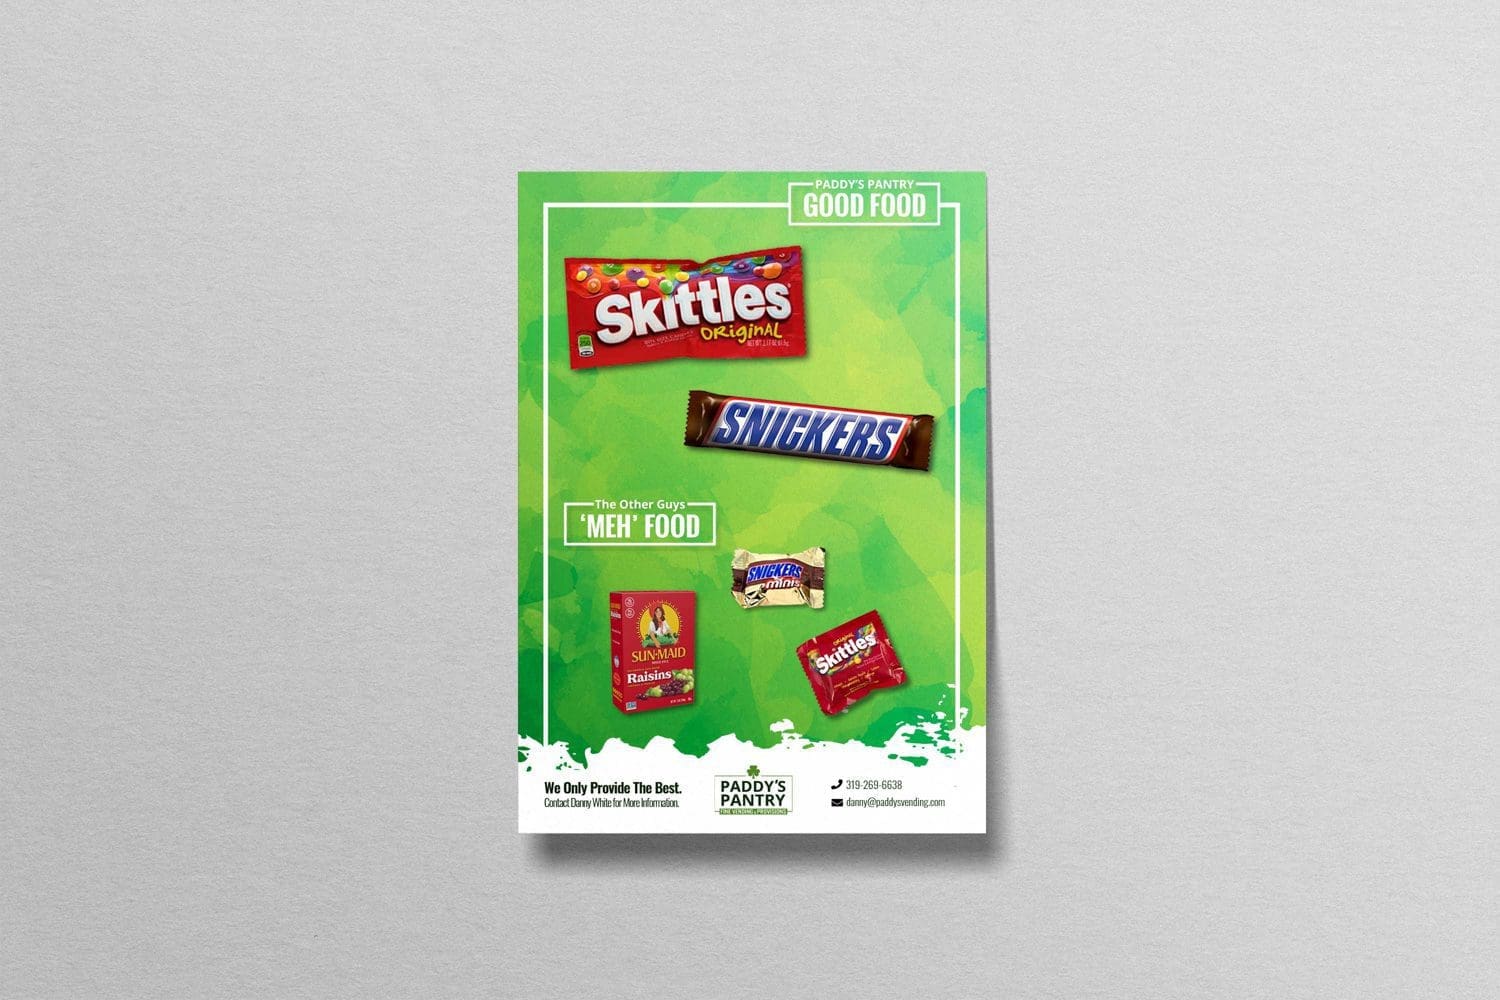 Paddys Pantry flyer candy